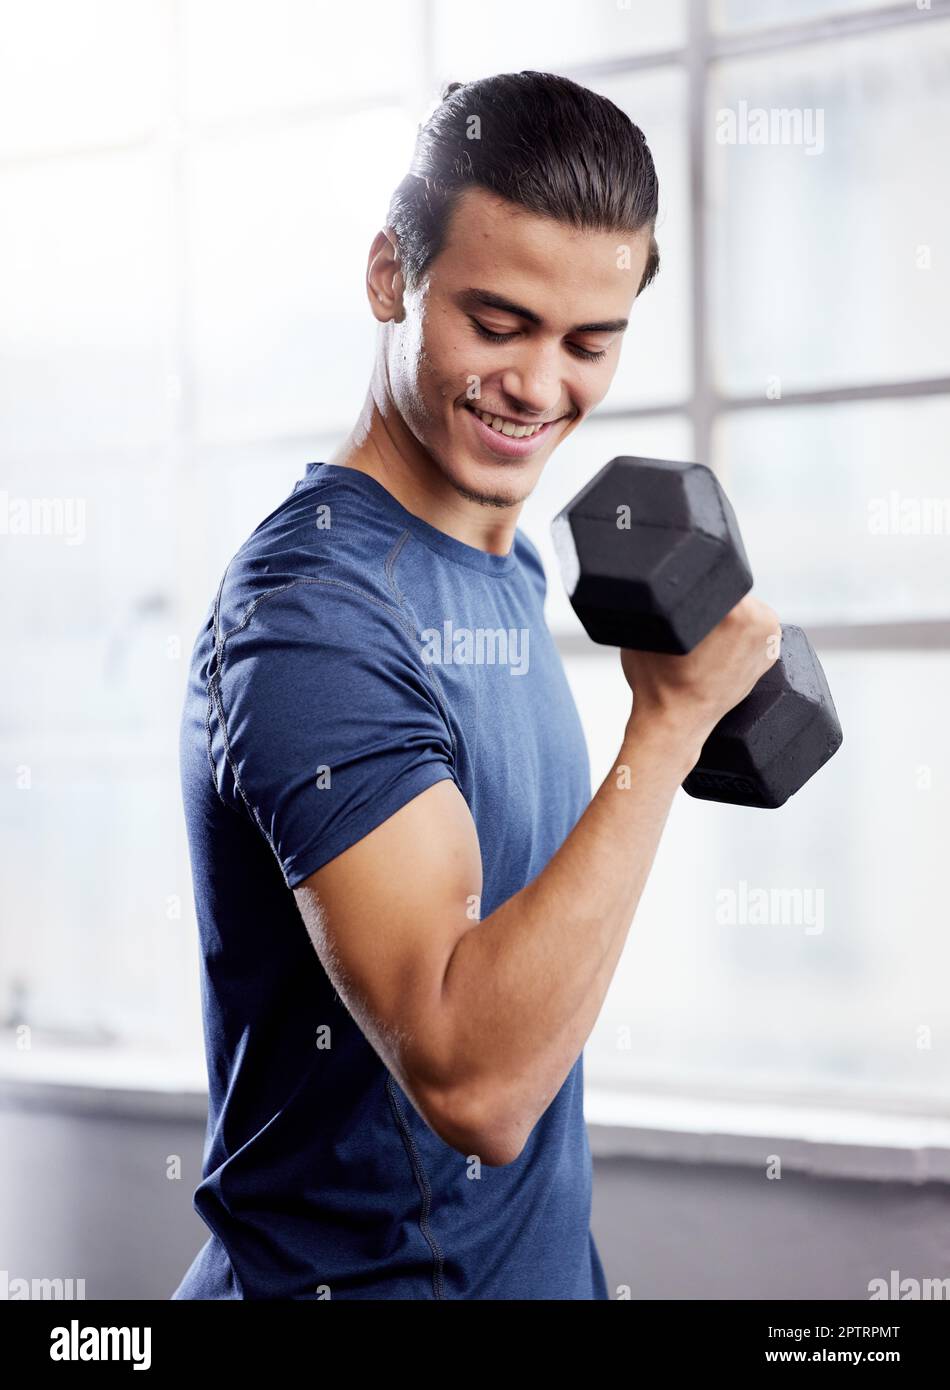 Weights, bodybuilding and fitness with a man training for arm muscles and strength in a gym. Weightlifting, body builder and metal equipment with heav Stock Photo